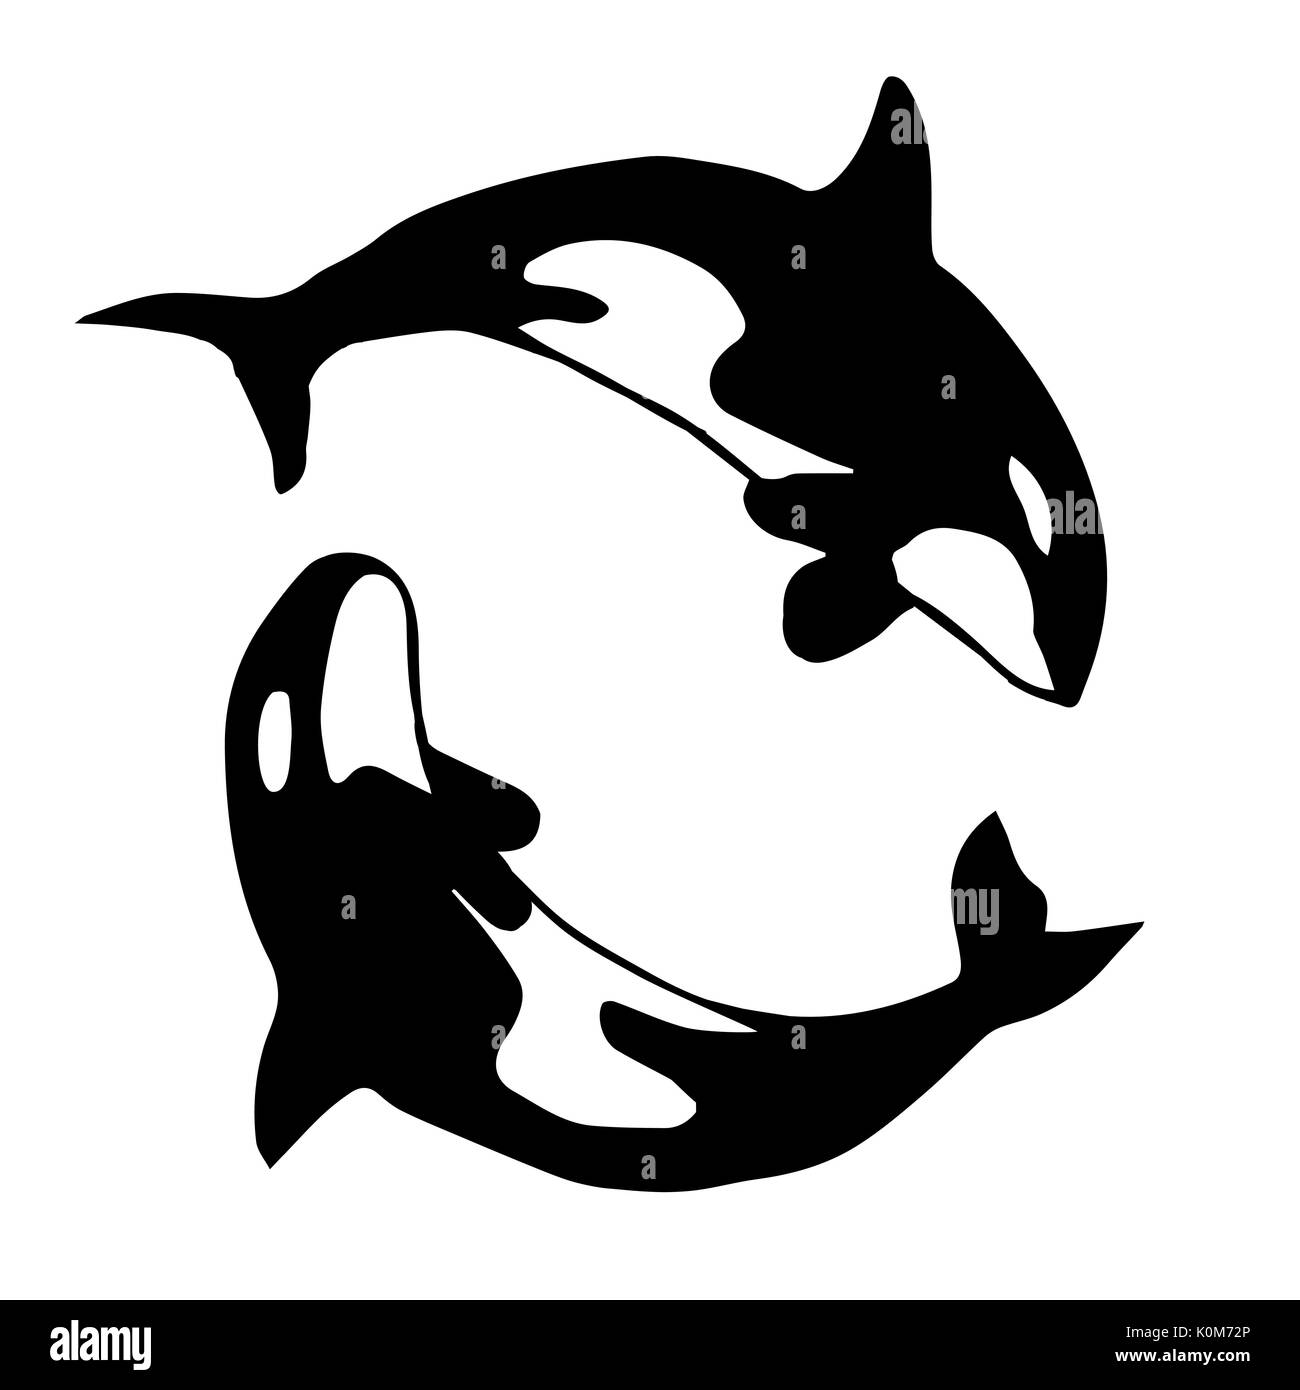 Stunning whales. Silhouette of dancing mammals. Stock Vector